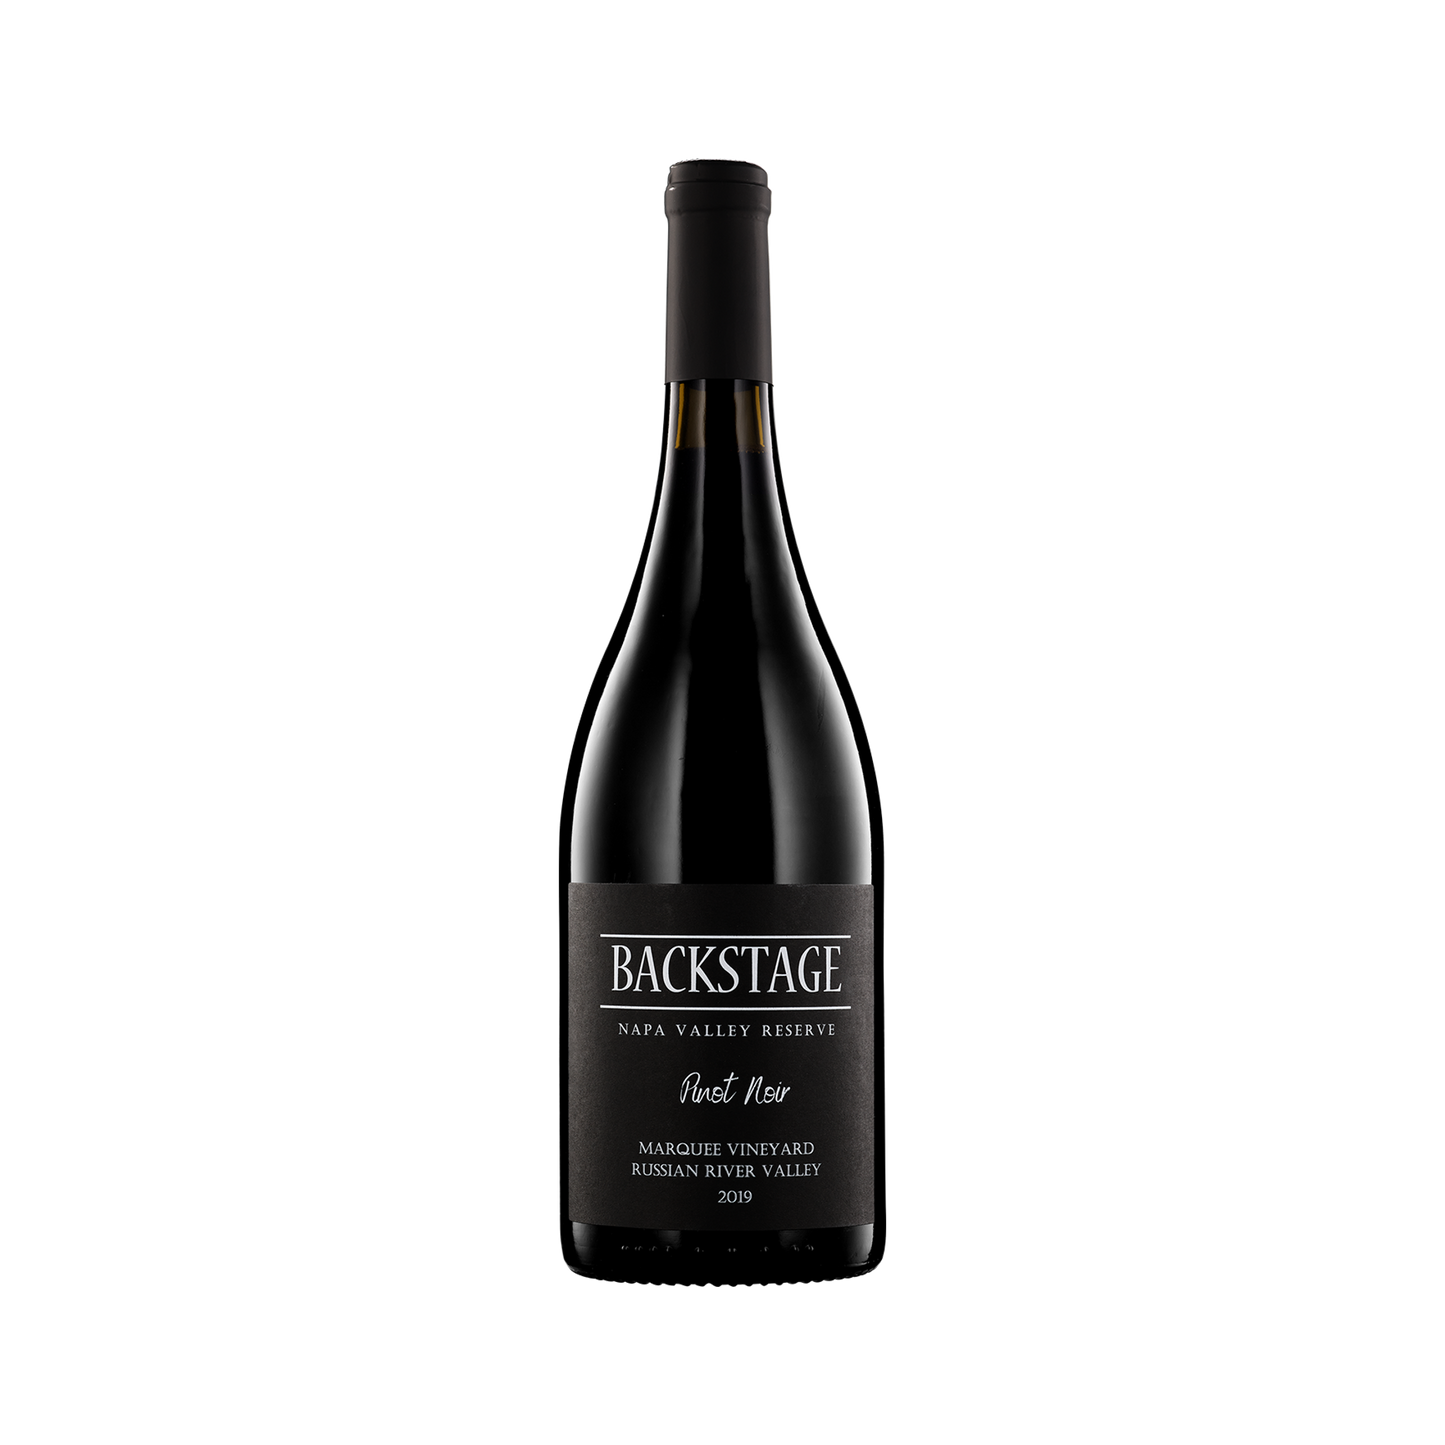 A bottle of Backstage 2019 Pinot Noir